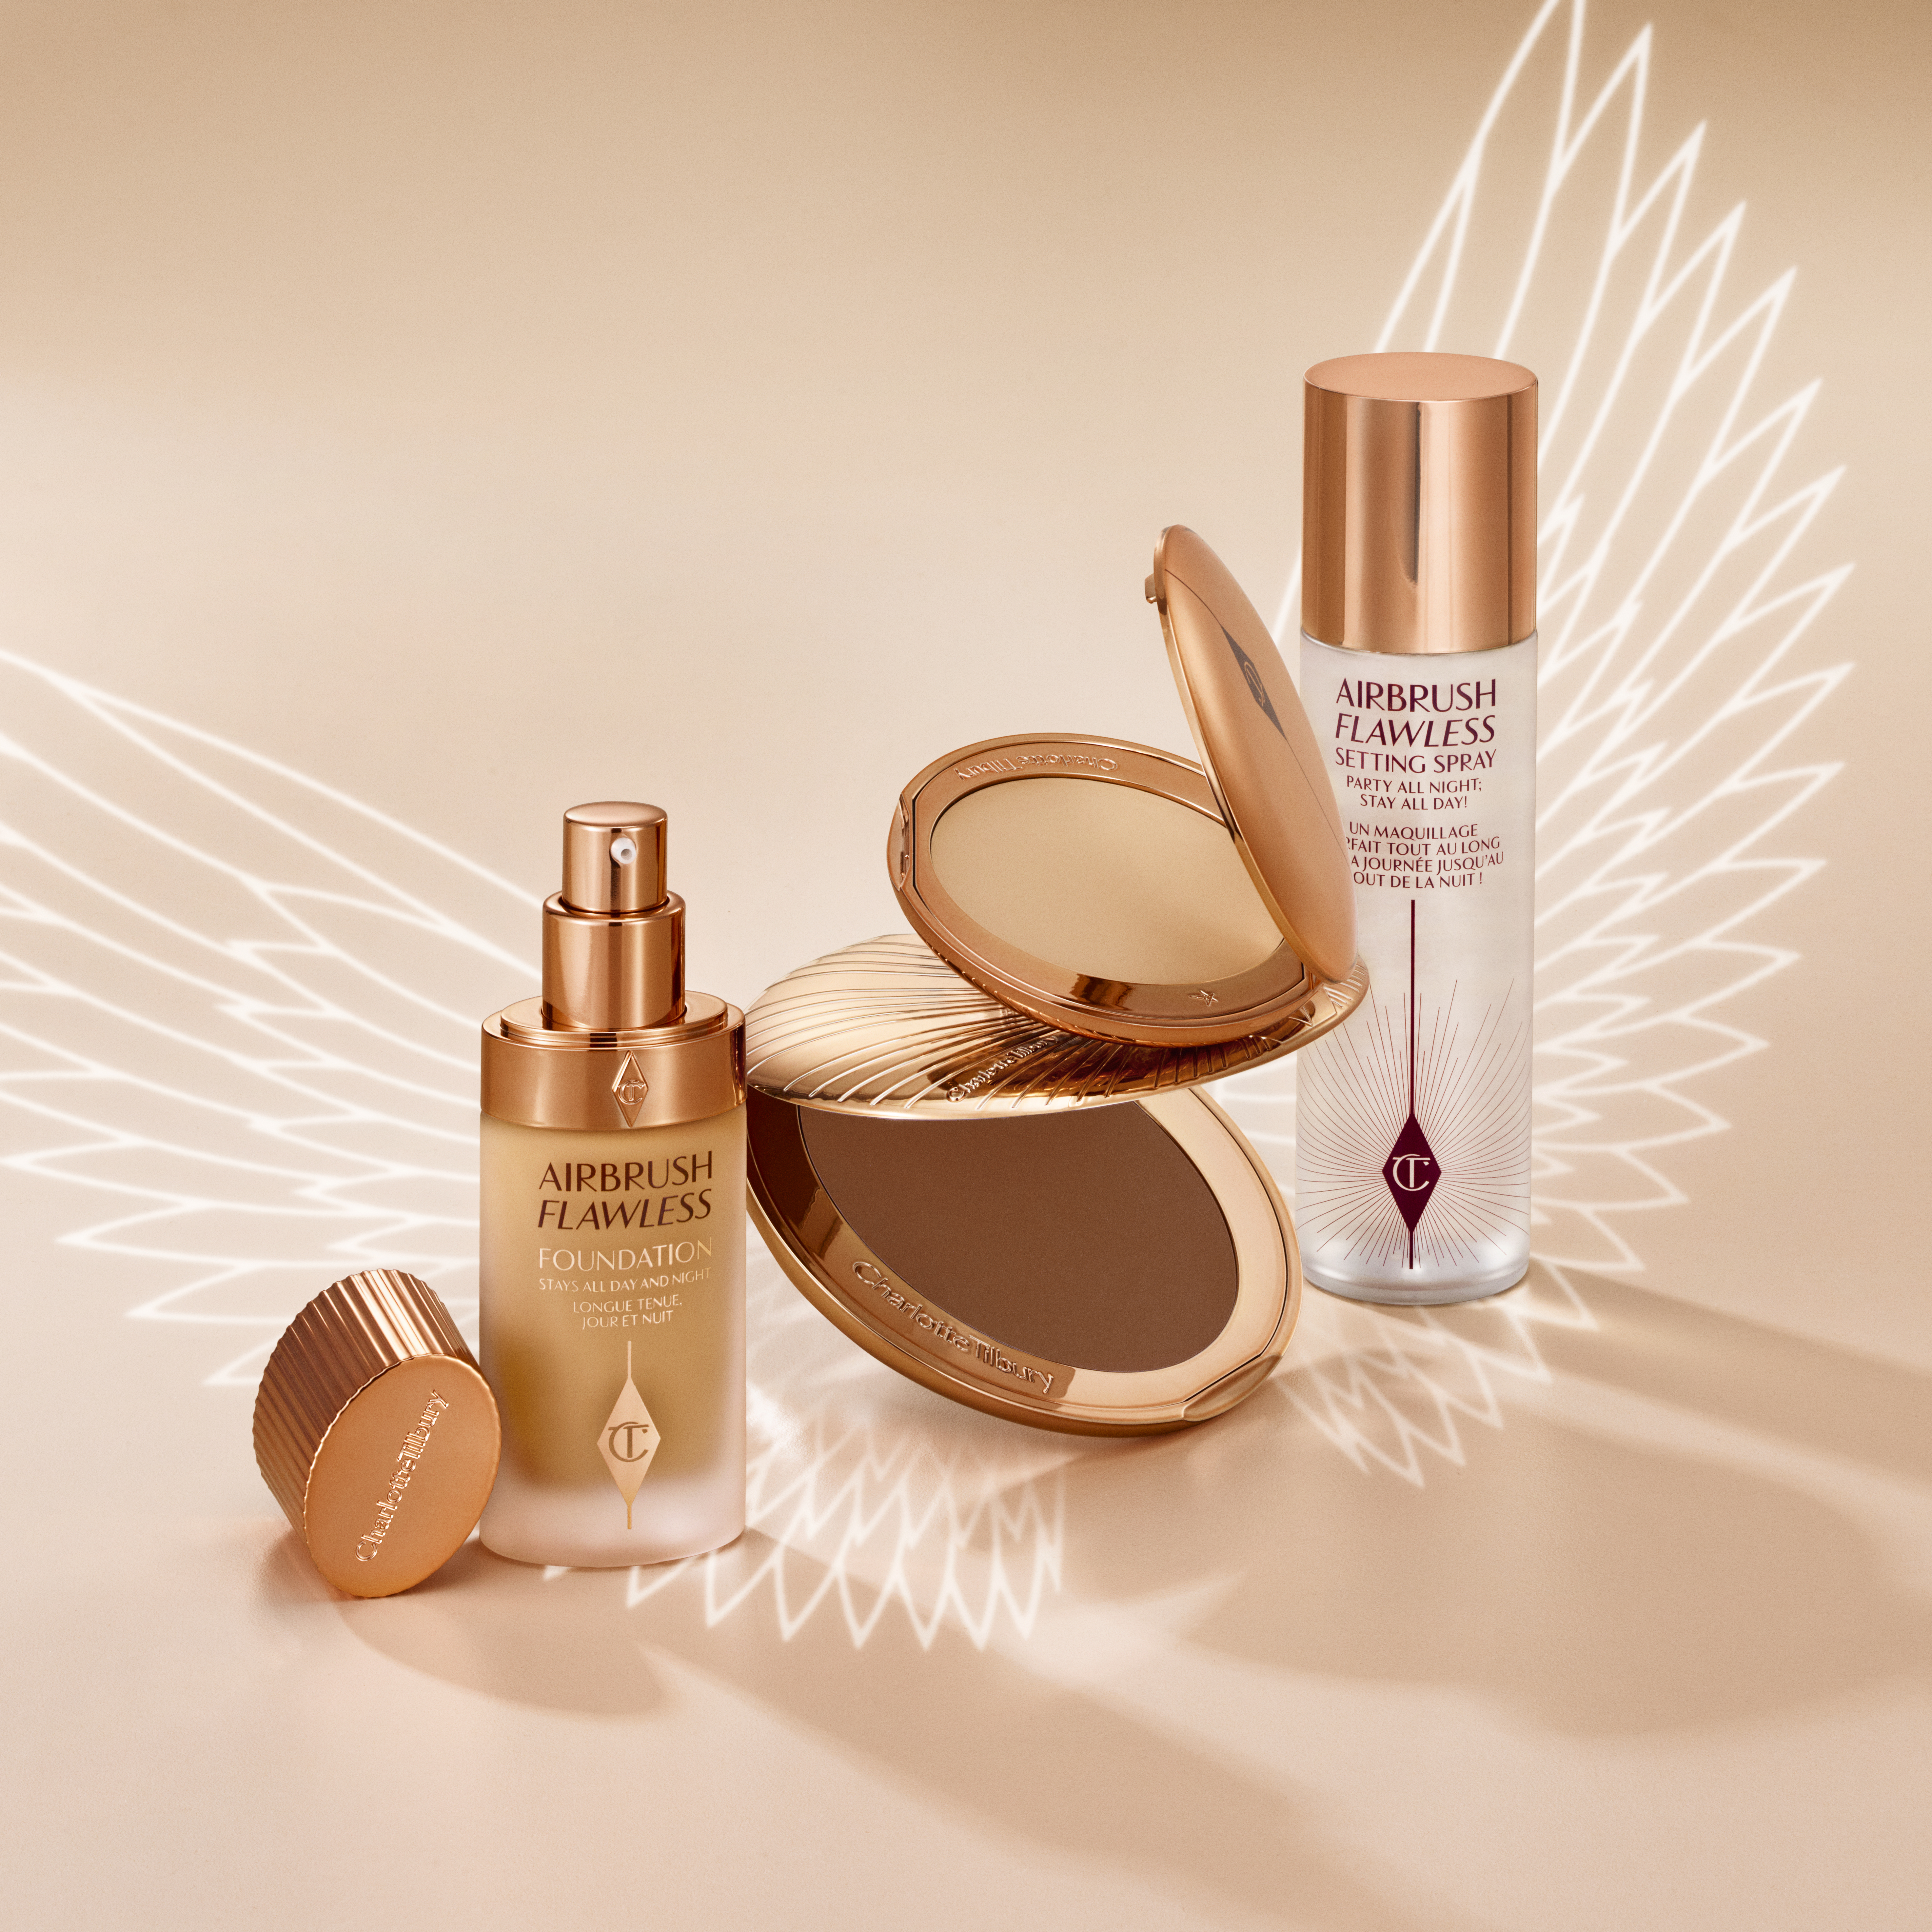 Banner with a collection of makeup that includes a setting spray, setting powder compact, foundation in a frosted glass bottle with a pump dispenser, and a bronzer compact, all in sleek, gold-coloured packaging